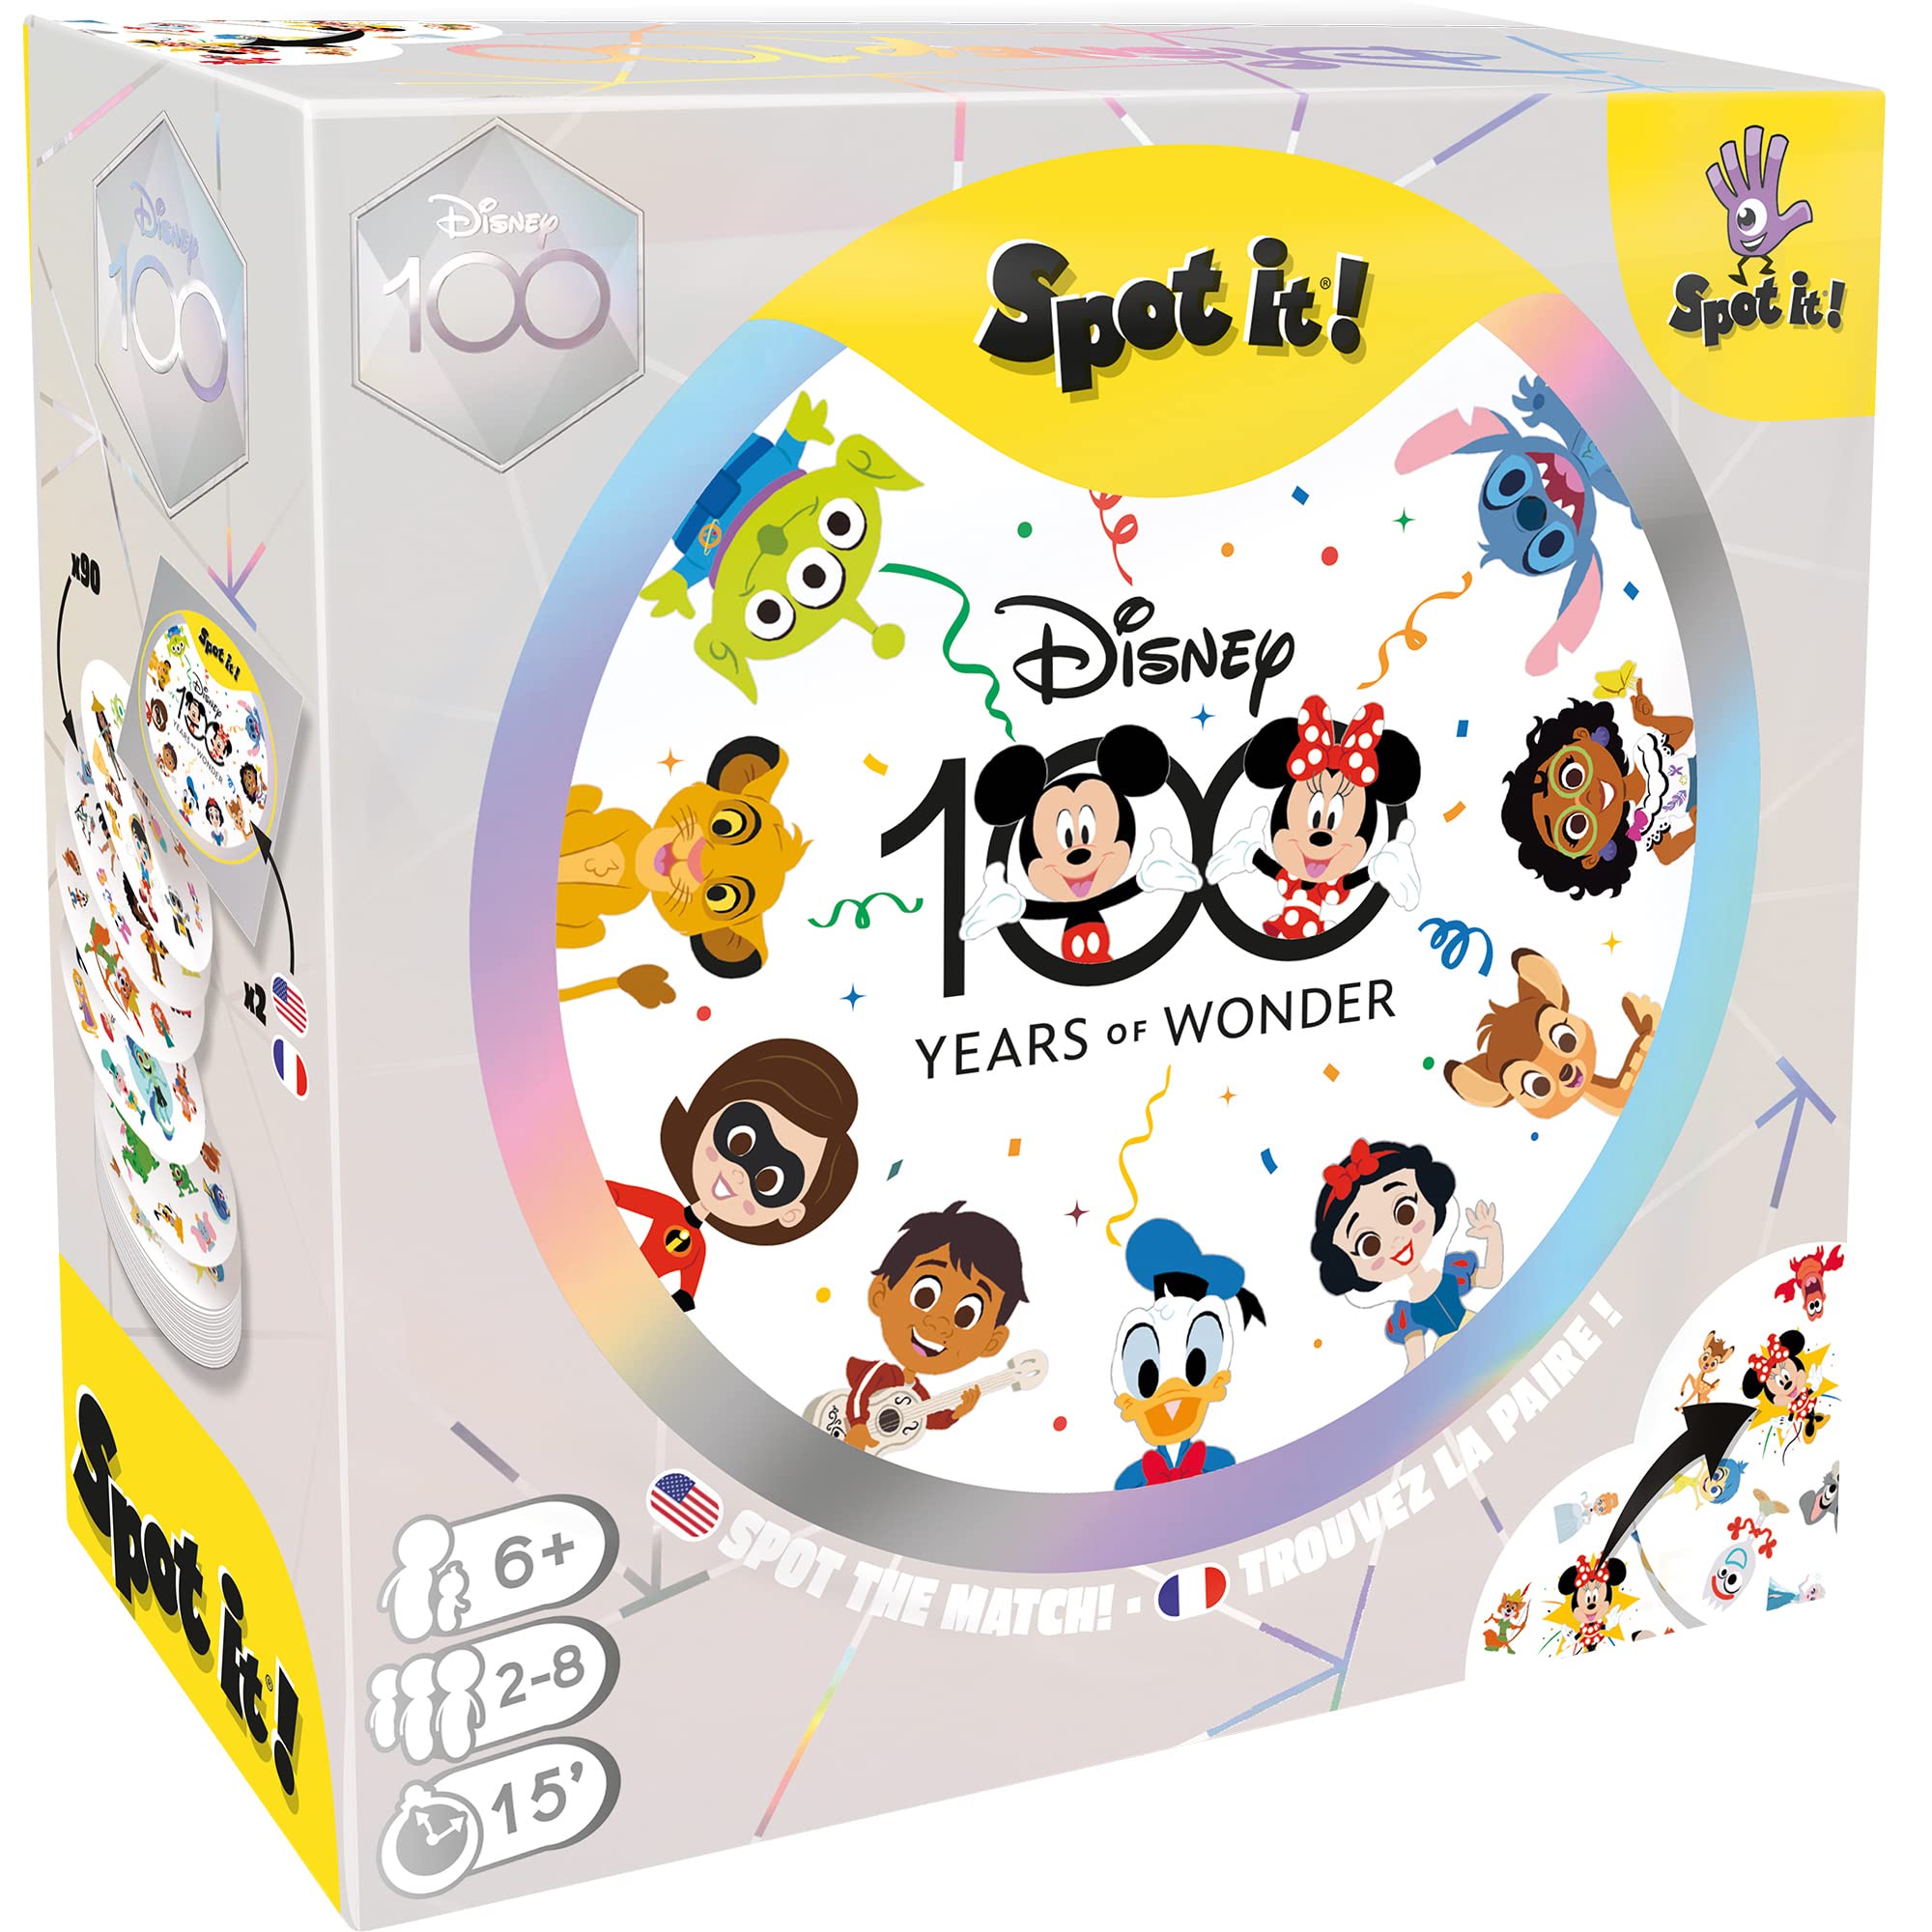 Spot It! Disney 100 Years of Wonder Card Game | Fast-Paced Symbol Matching Observation Game | Fun Family Game for Kids and Adults | Age 6+ | 2-8 Players | Avg. Playtime 15 Minutes | Made by Zygomatic